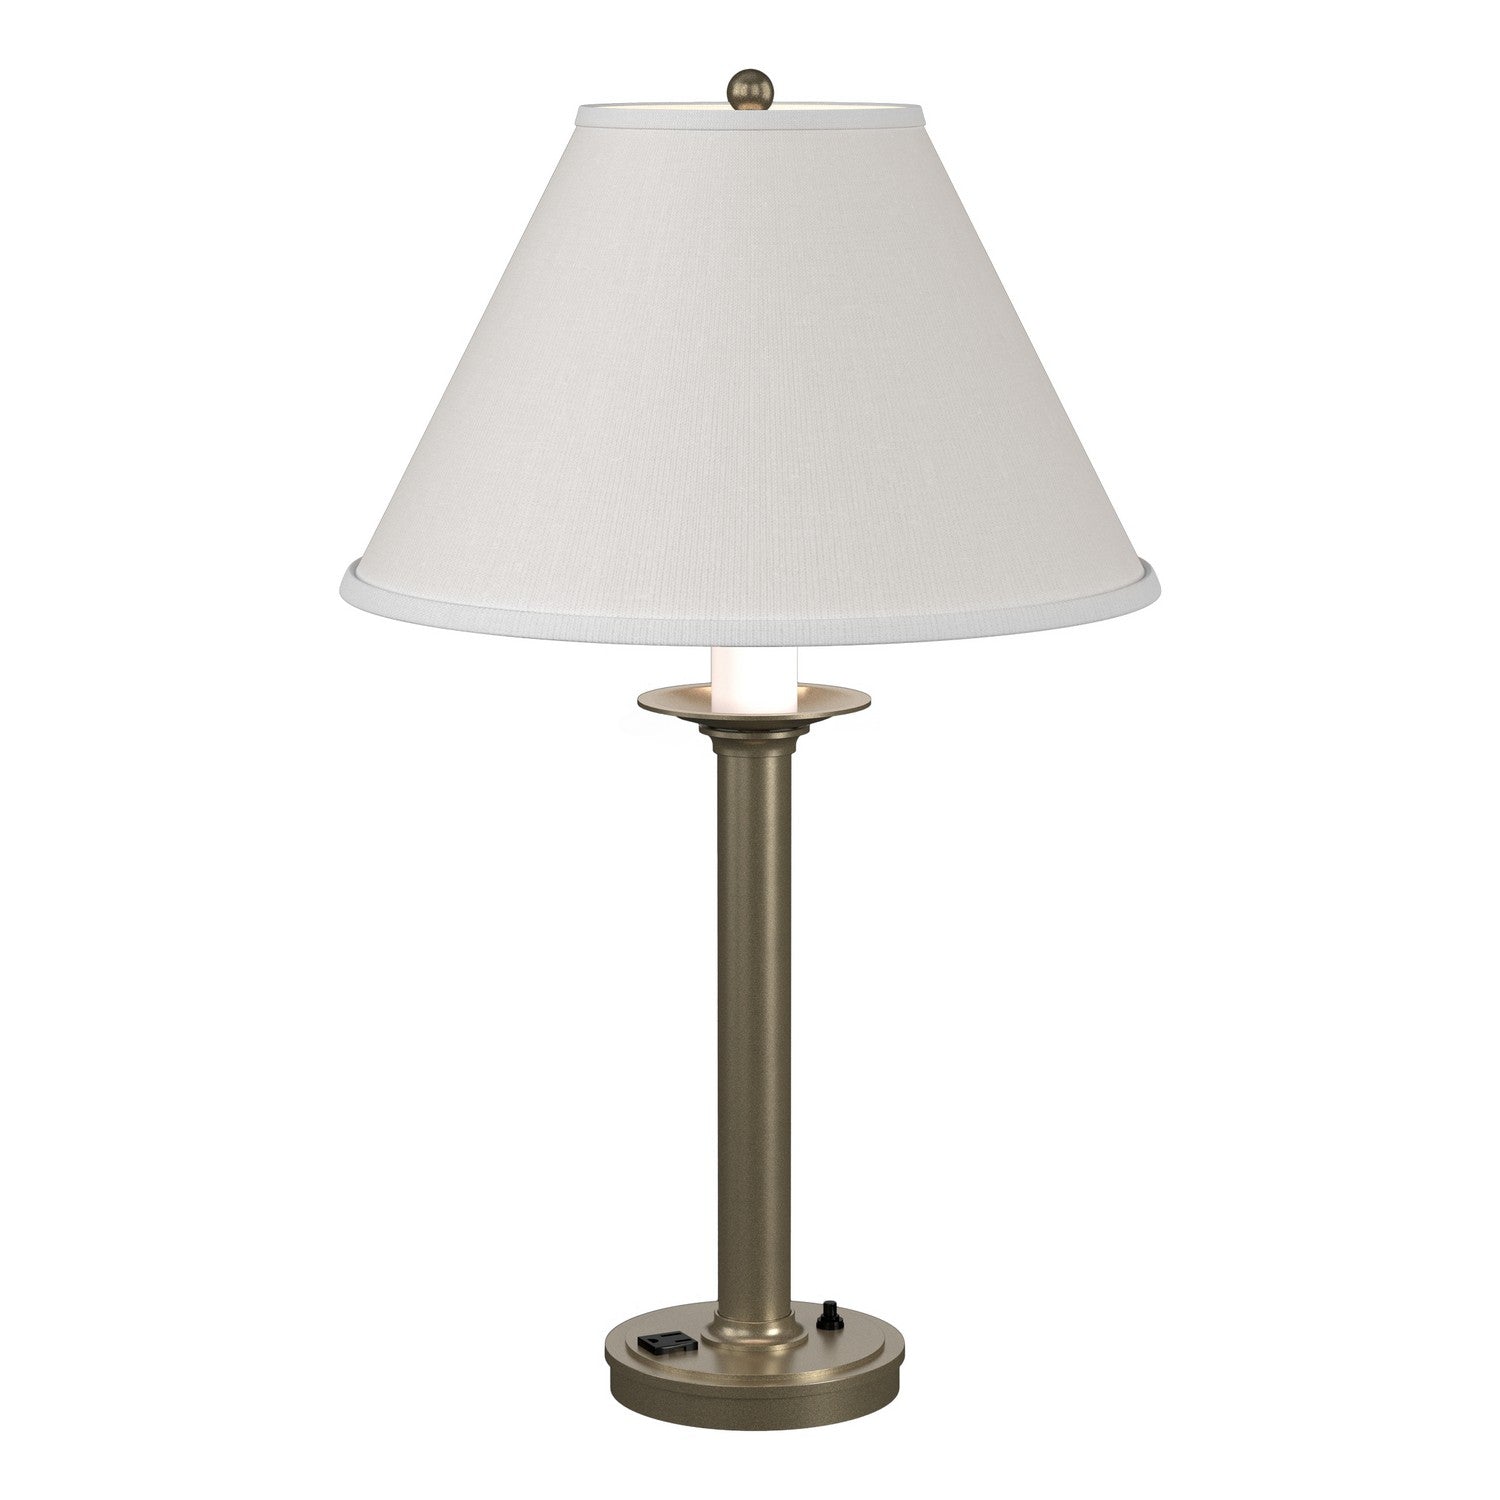 Hubbardton Forge - One Light Table Lamp - Simple Lines - Soft Gold- Union Lighting Luminaires Decor